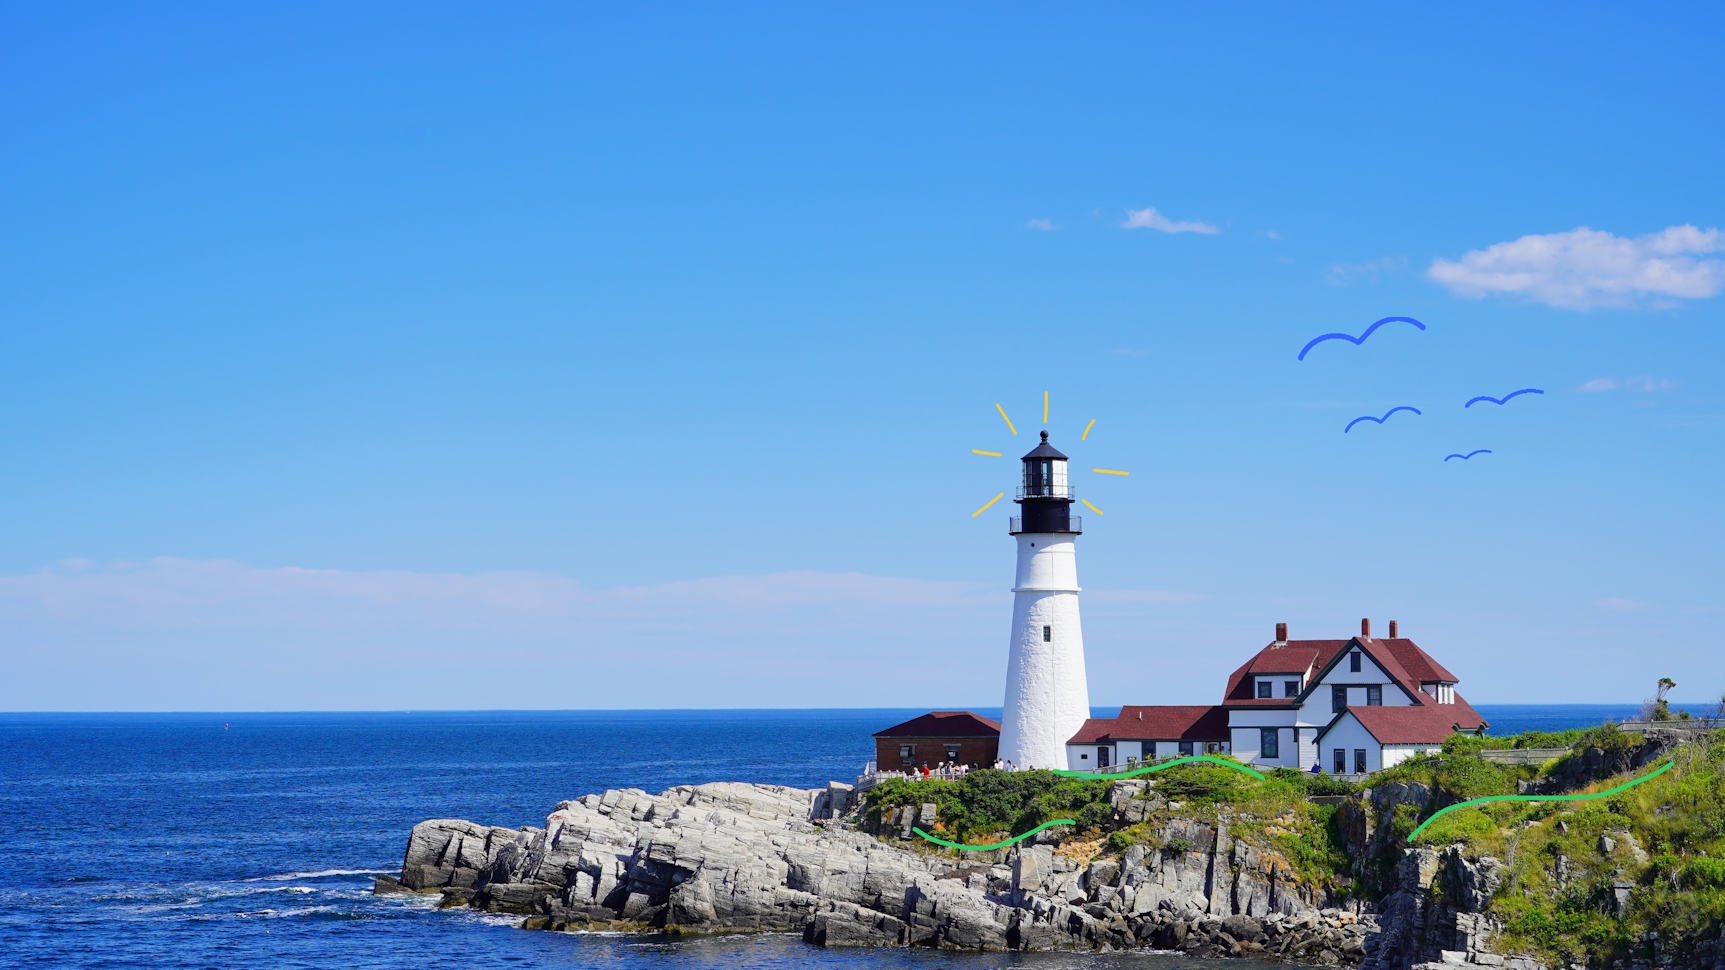 an image of portland head light, a lighthouse on a cliff overlooking the ocean